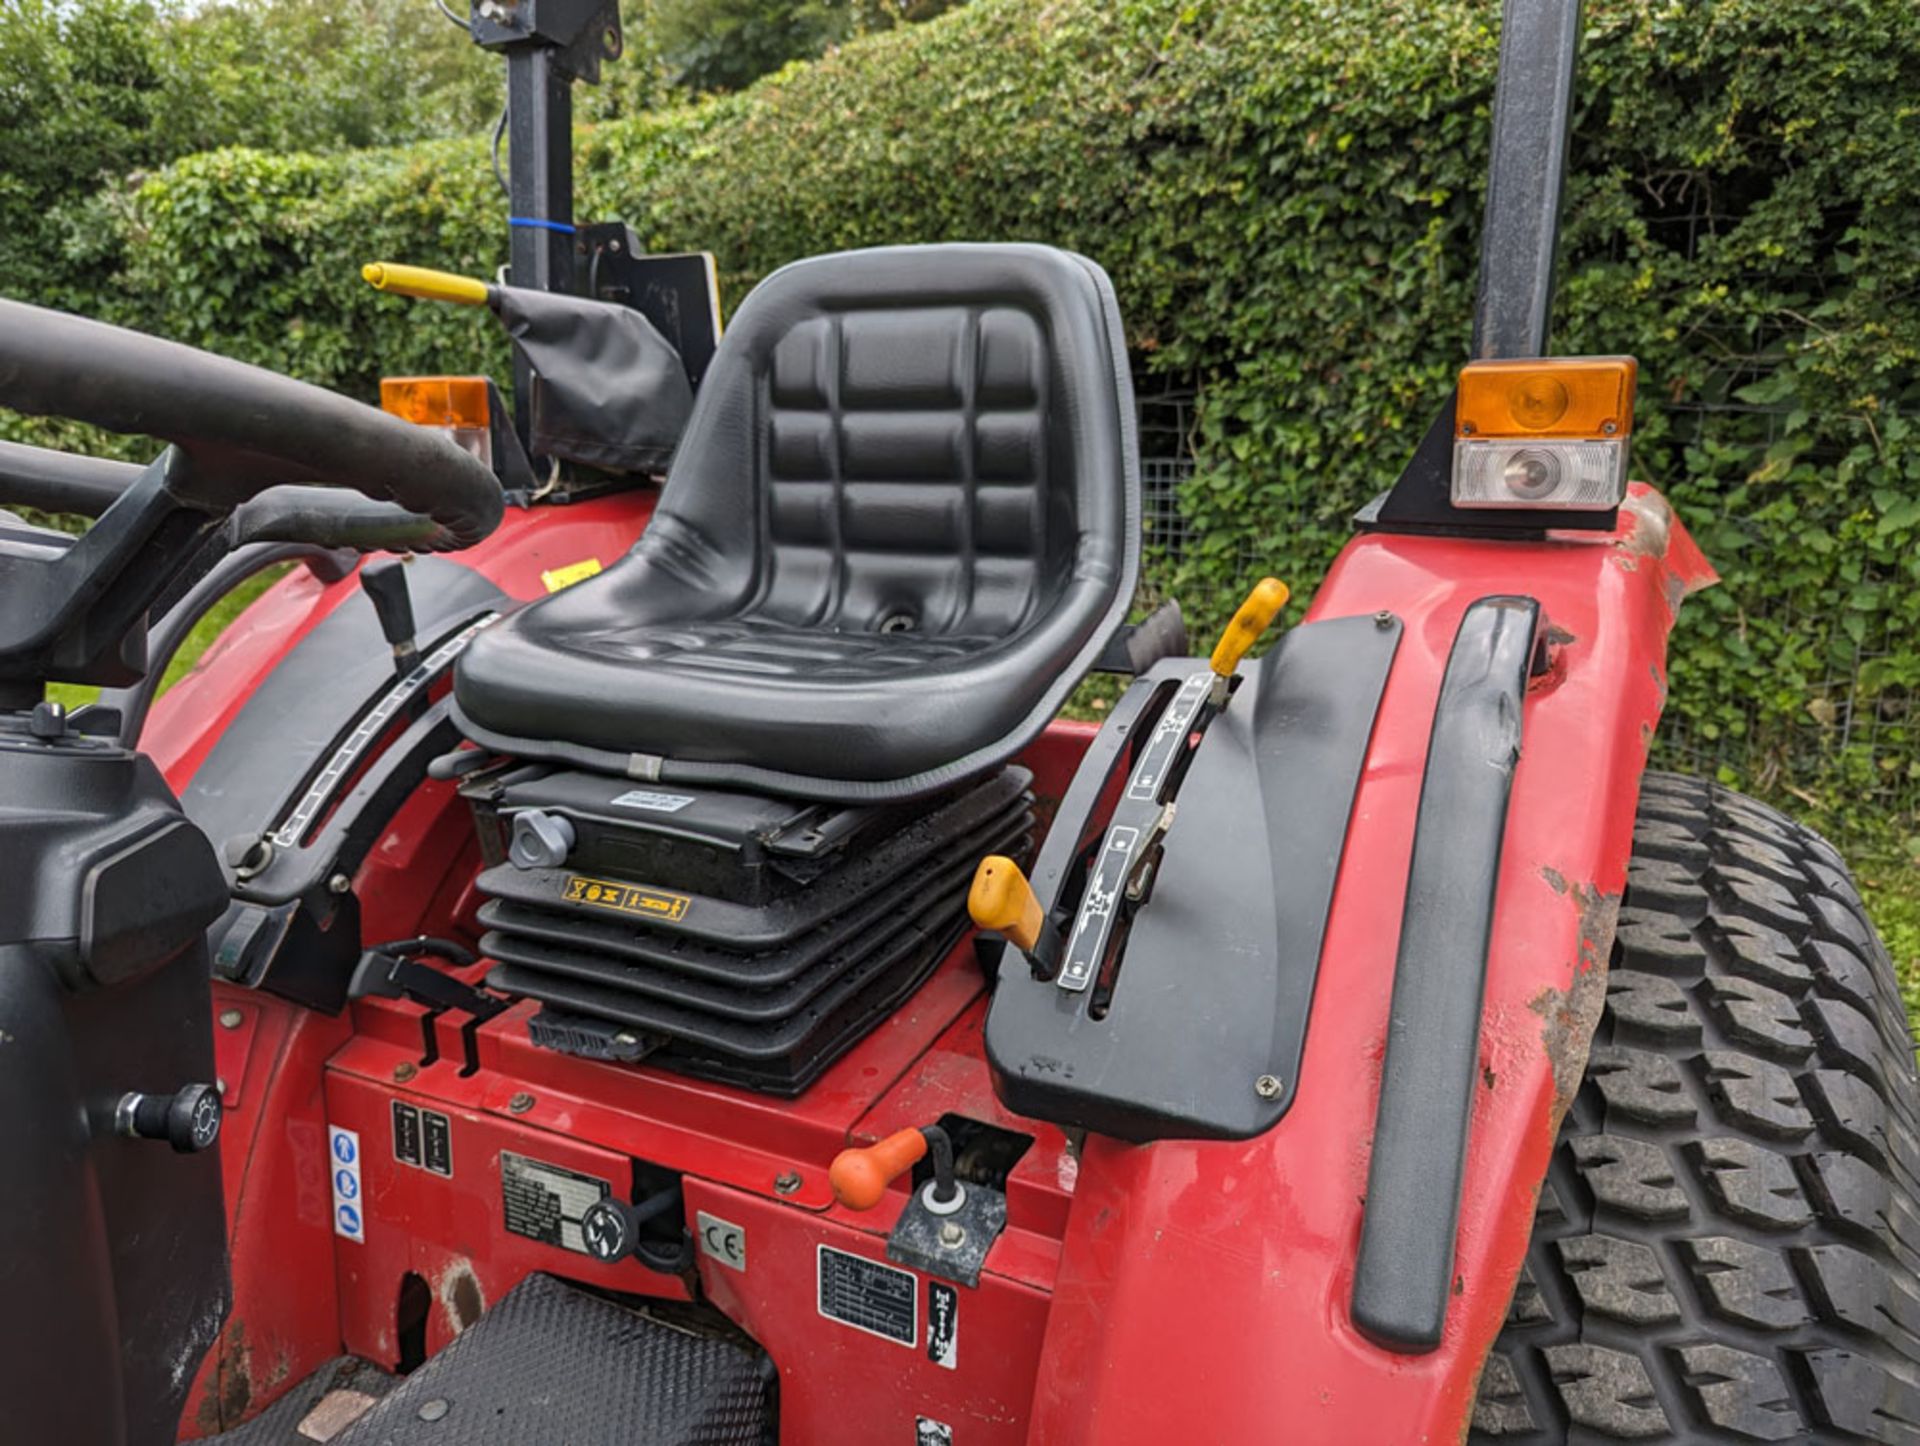 2013 Shibaura ST333 Compact Tractor With Lewis 25QH Loader Attachment 1848 Hours - Image 6 of 11